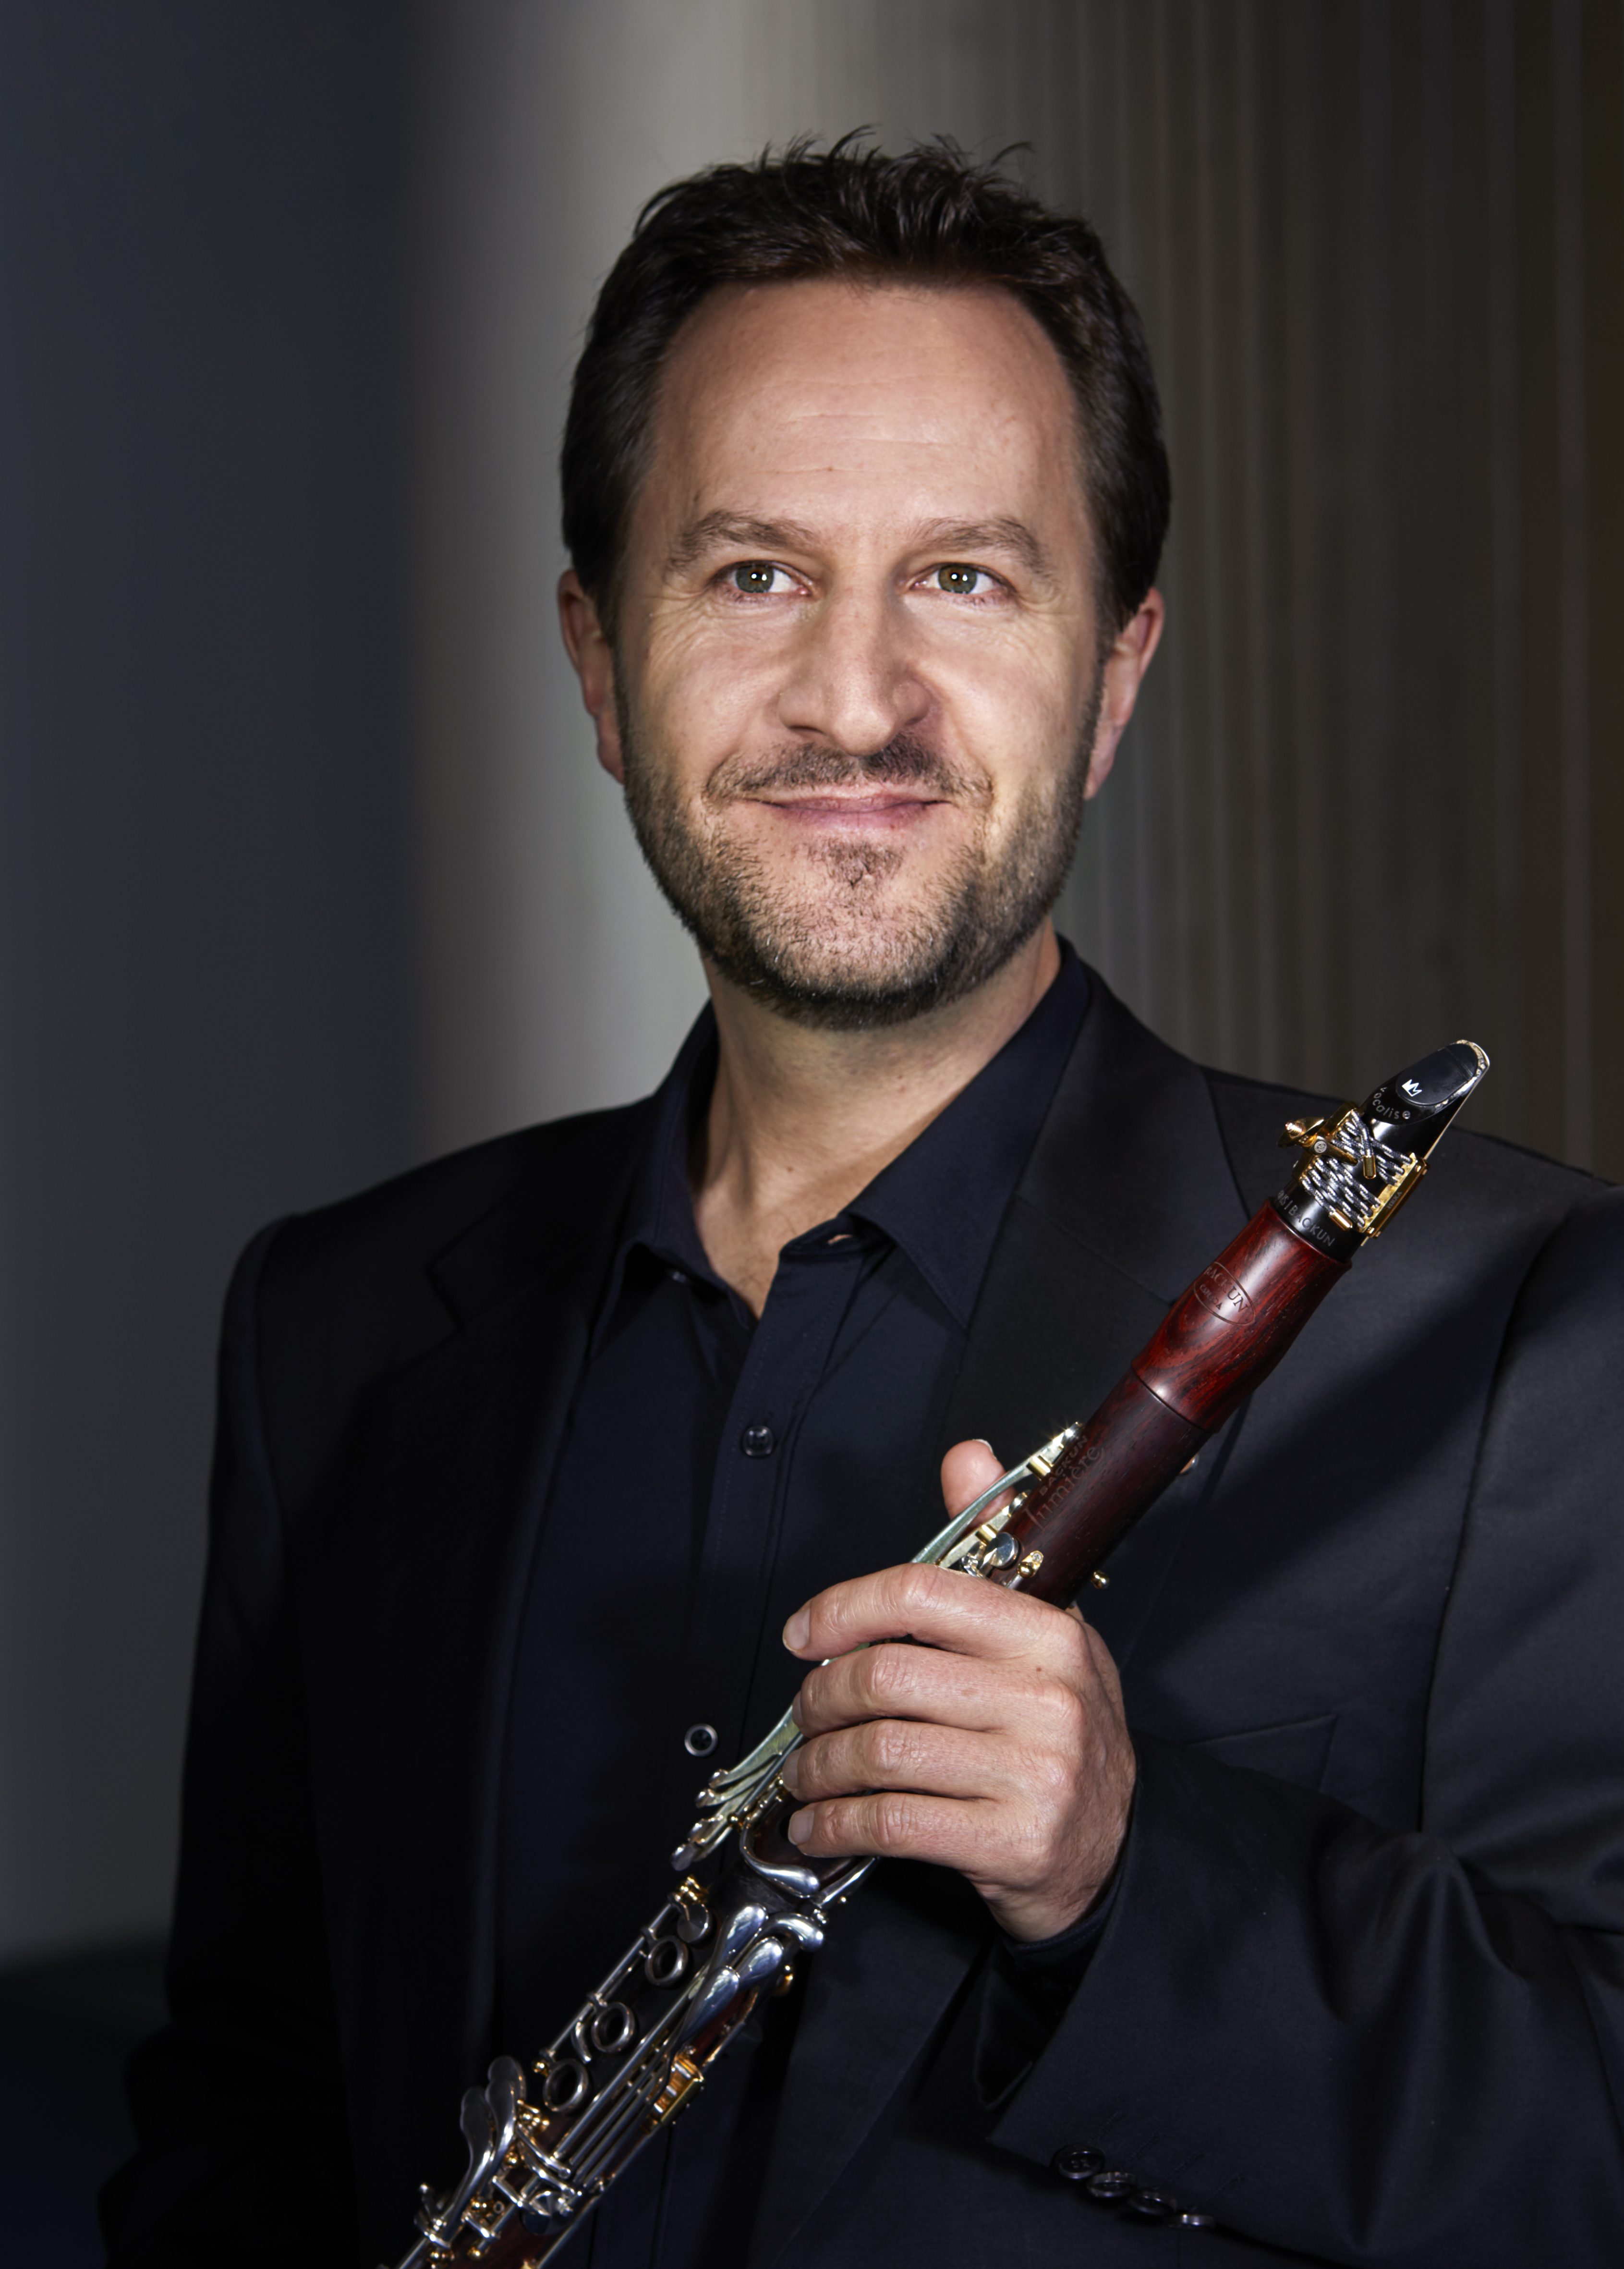 Man with short brwn hair and a short beard wearing a black suit and holding a clarinet